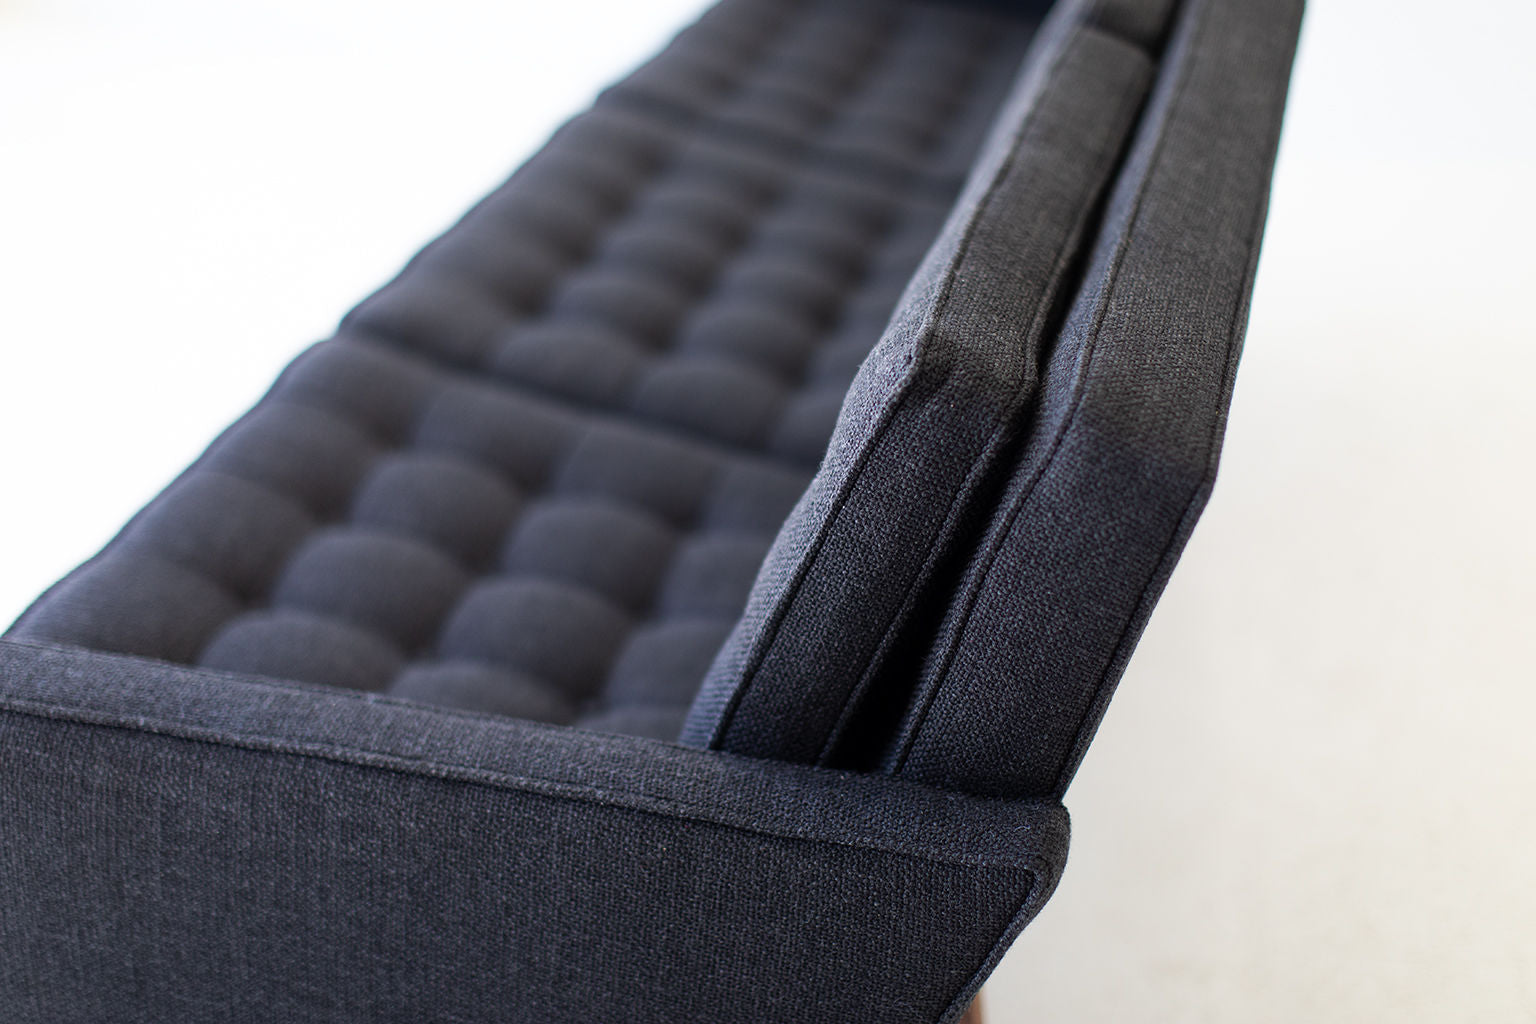 Jack Cartwright Sofa for Founders Furniture